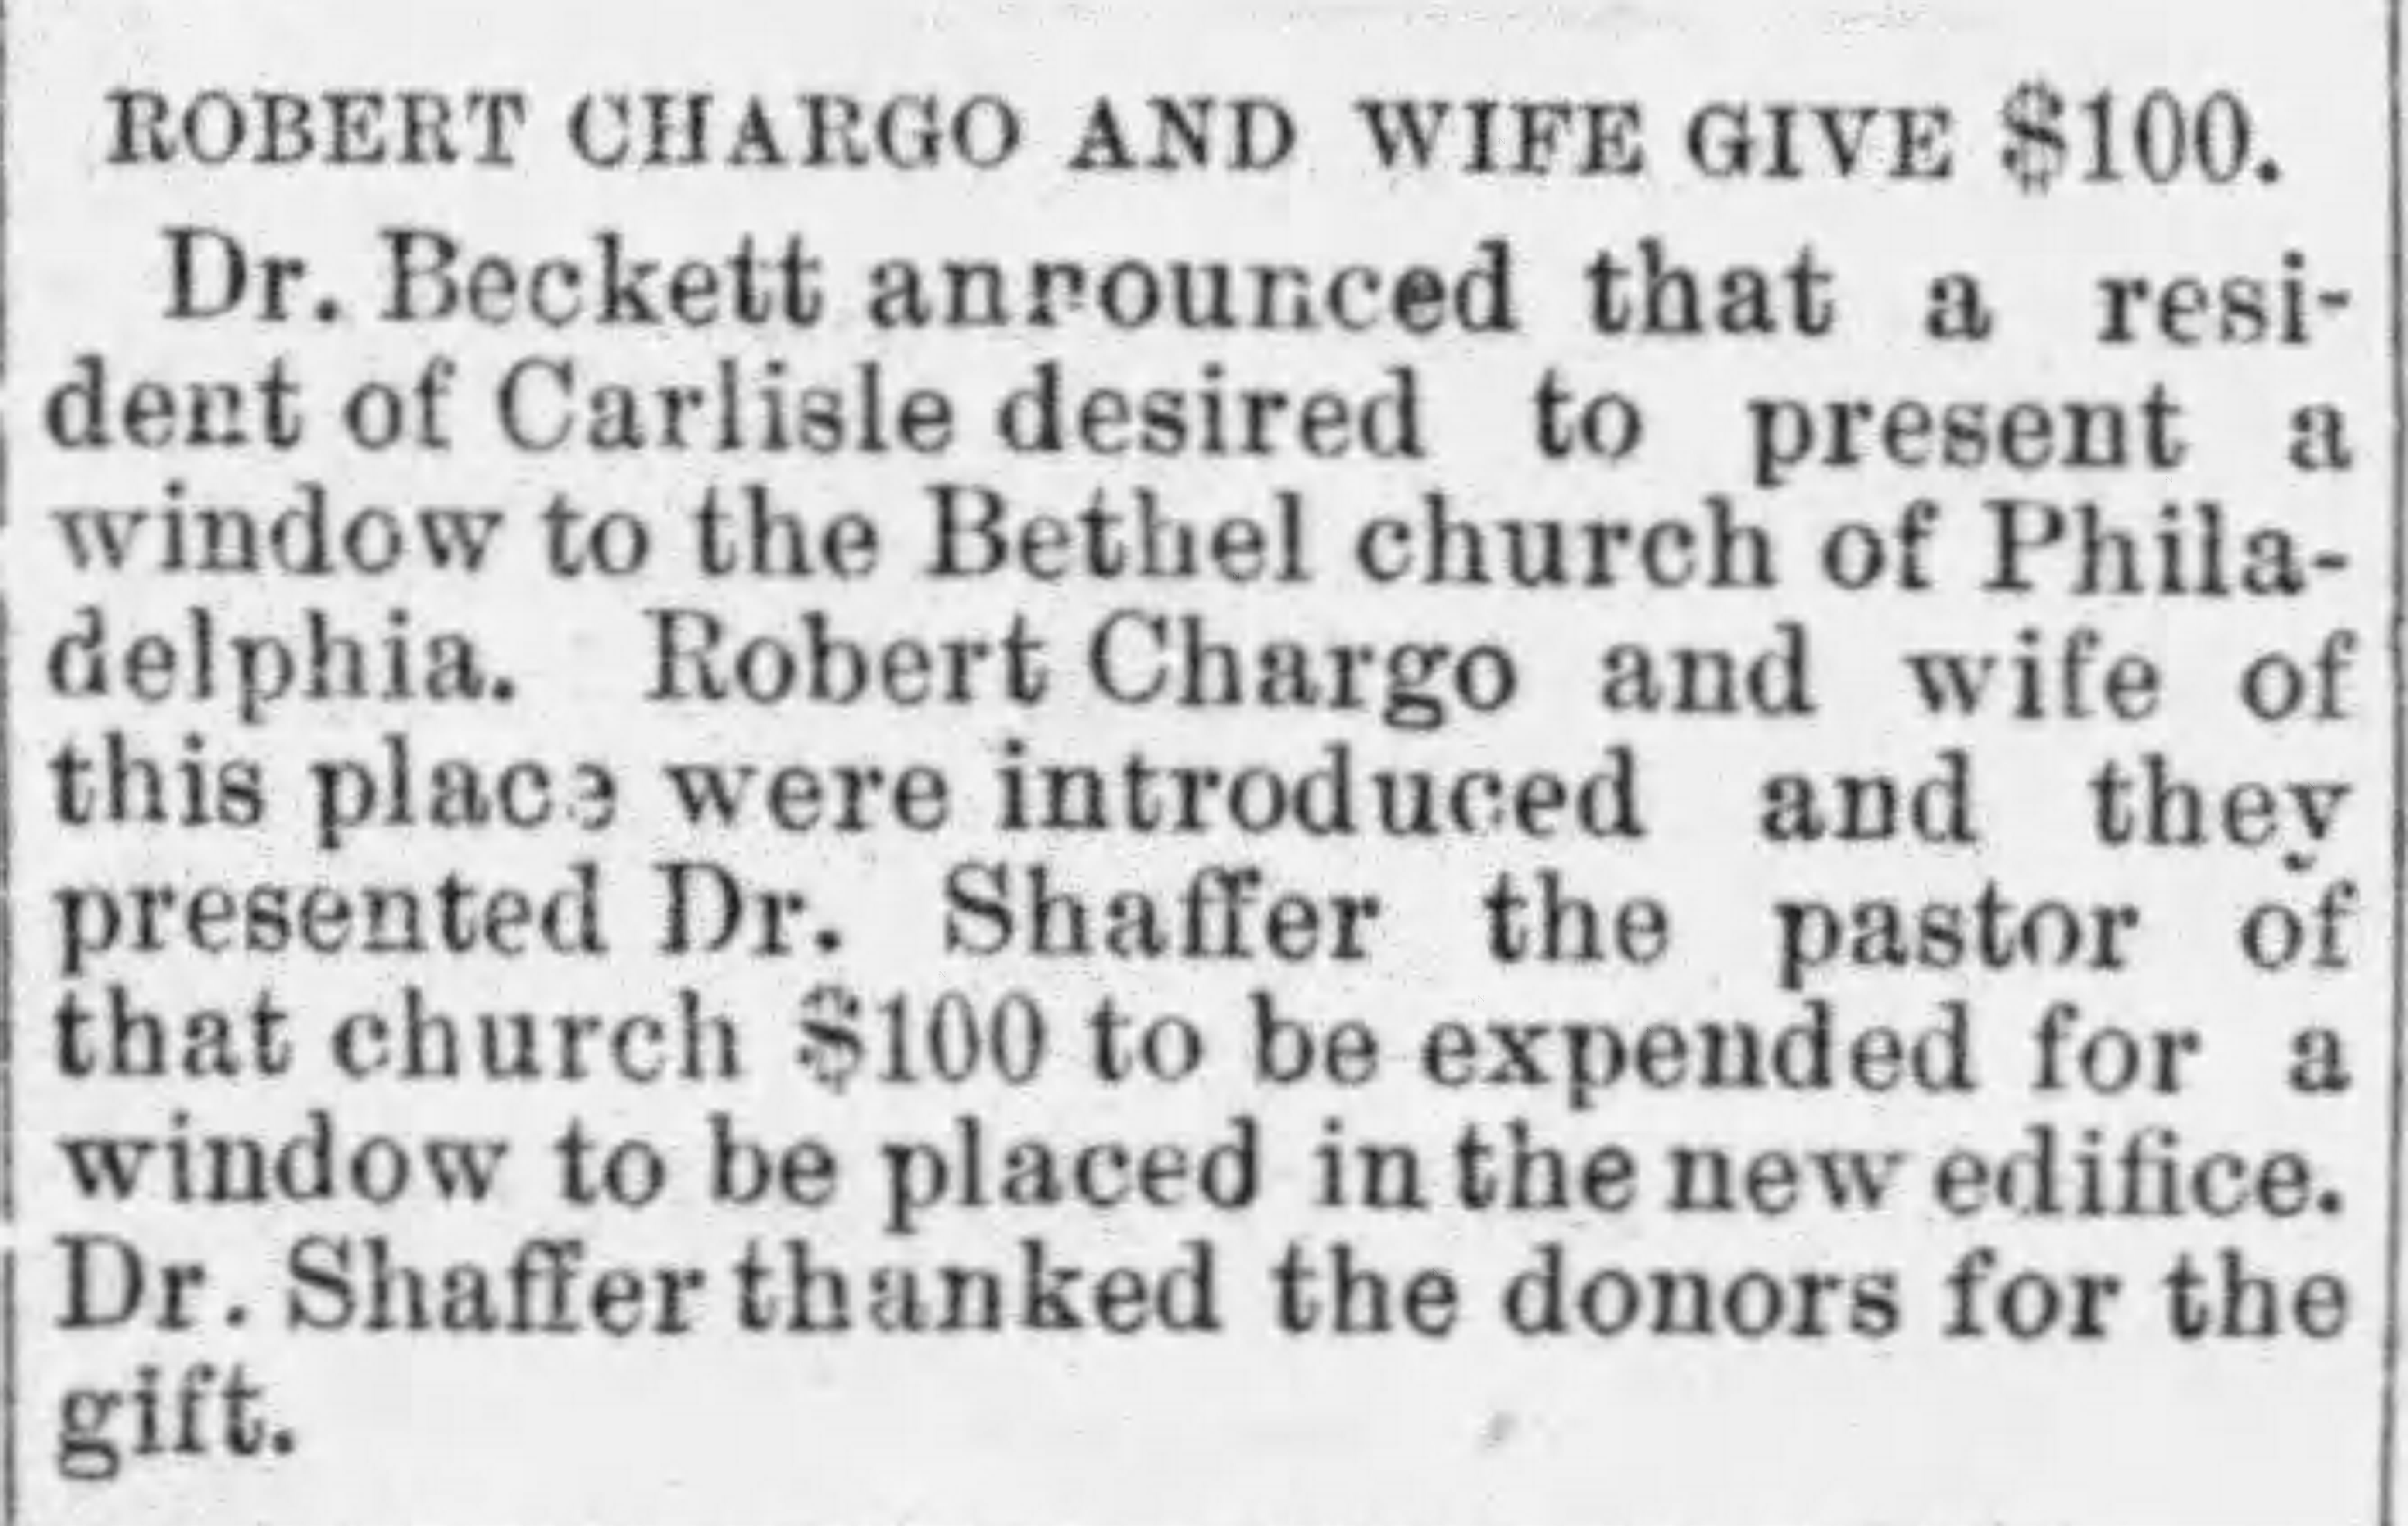 Newspaper article about Robert Chargo and wife making generous donation to Bethel Church of Philadelphia